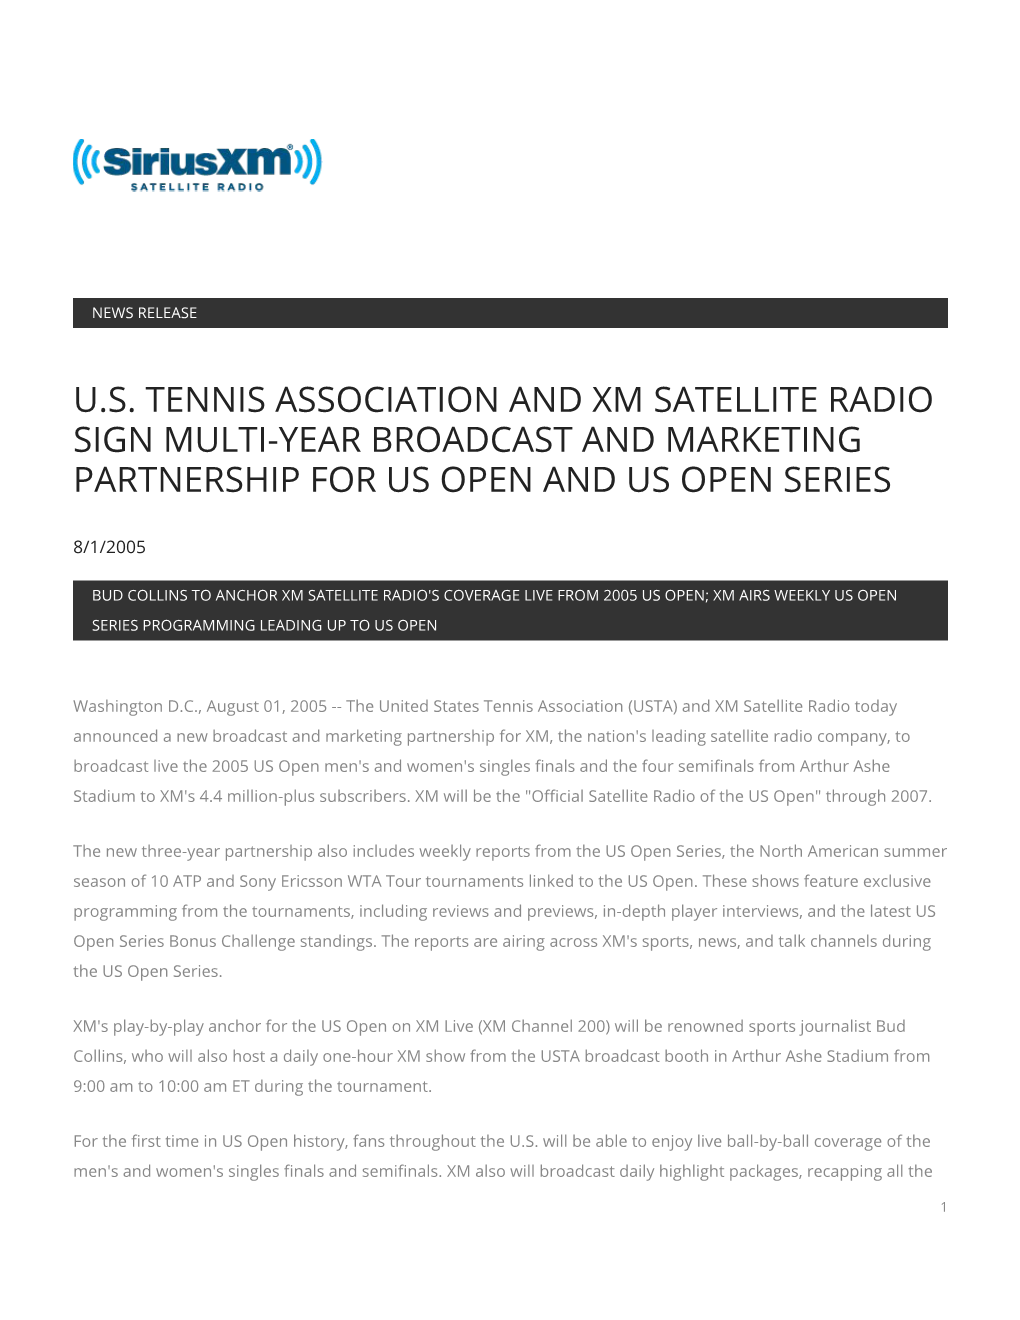 U.S. Tennis Association and Xm Satellite Radio Sign Multi-Year Broadcast and Marketing Partnership for Us Open and Us Open Series